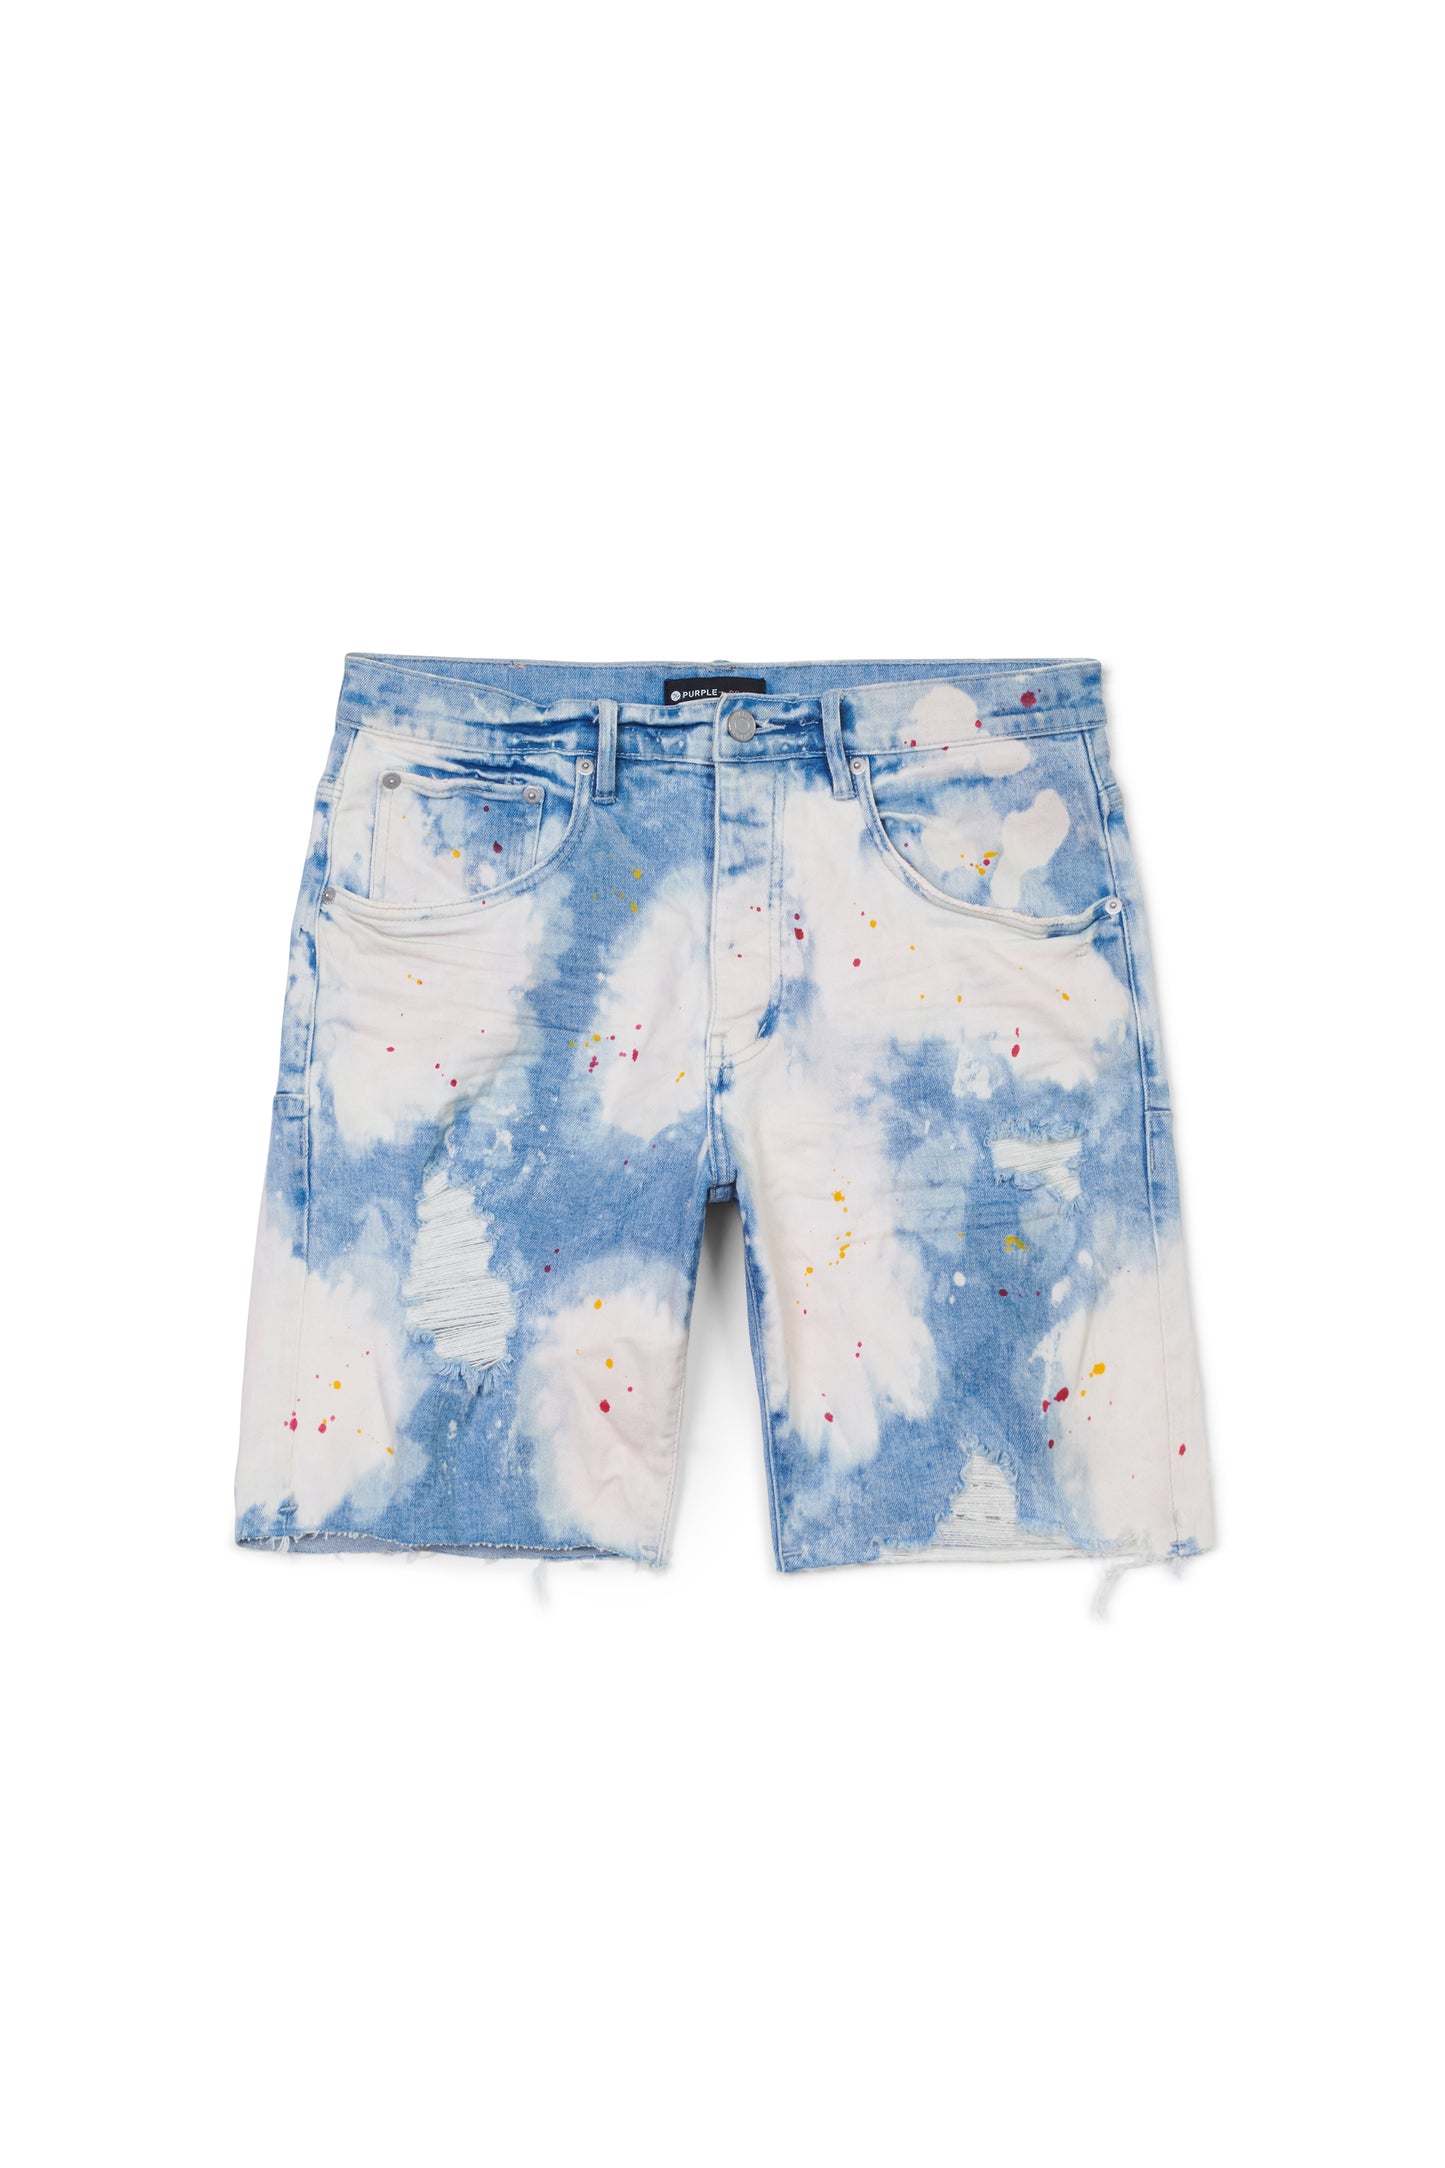 P020 MID RISE SHORT - Light Faded Indigo Bleached Out Splatter